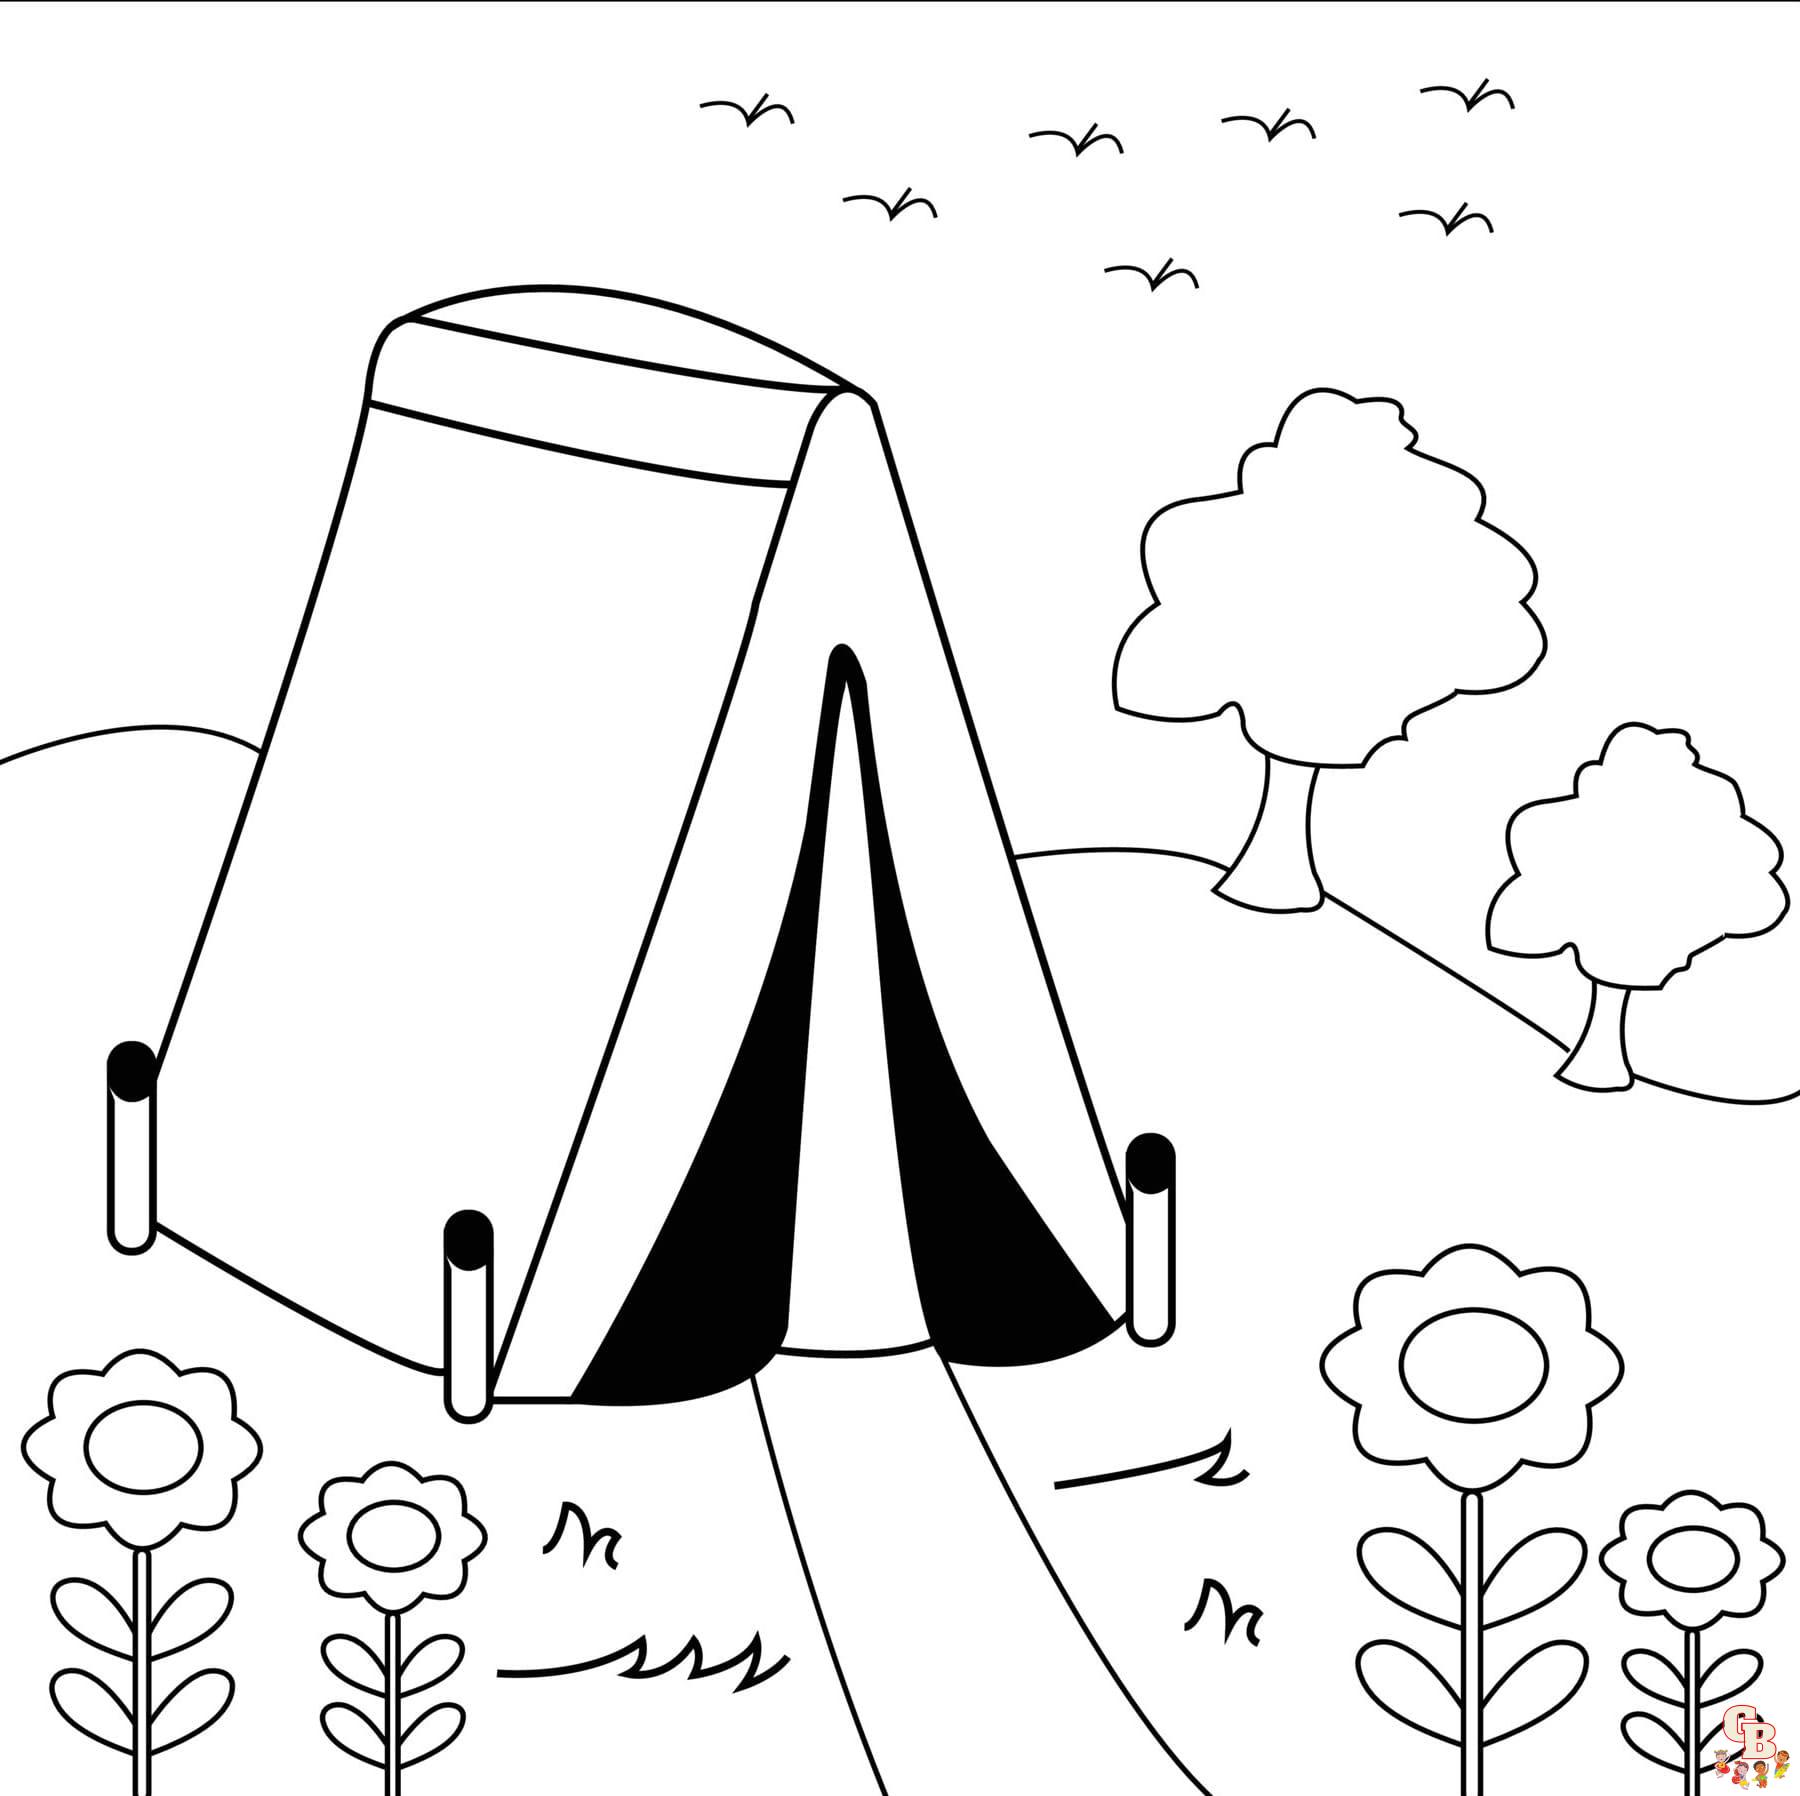 Tent coloring pages printable